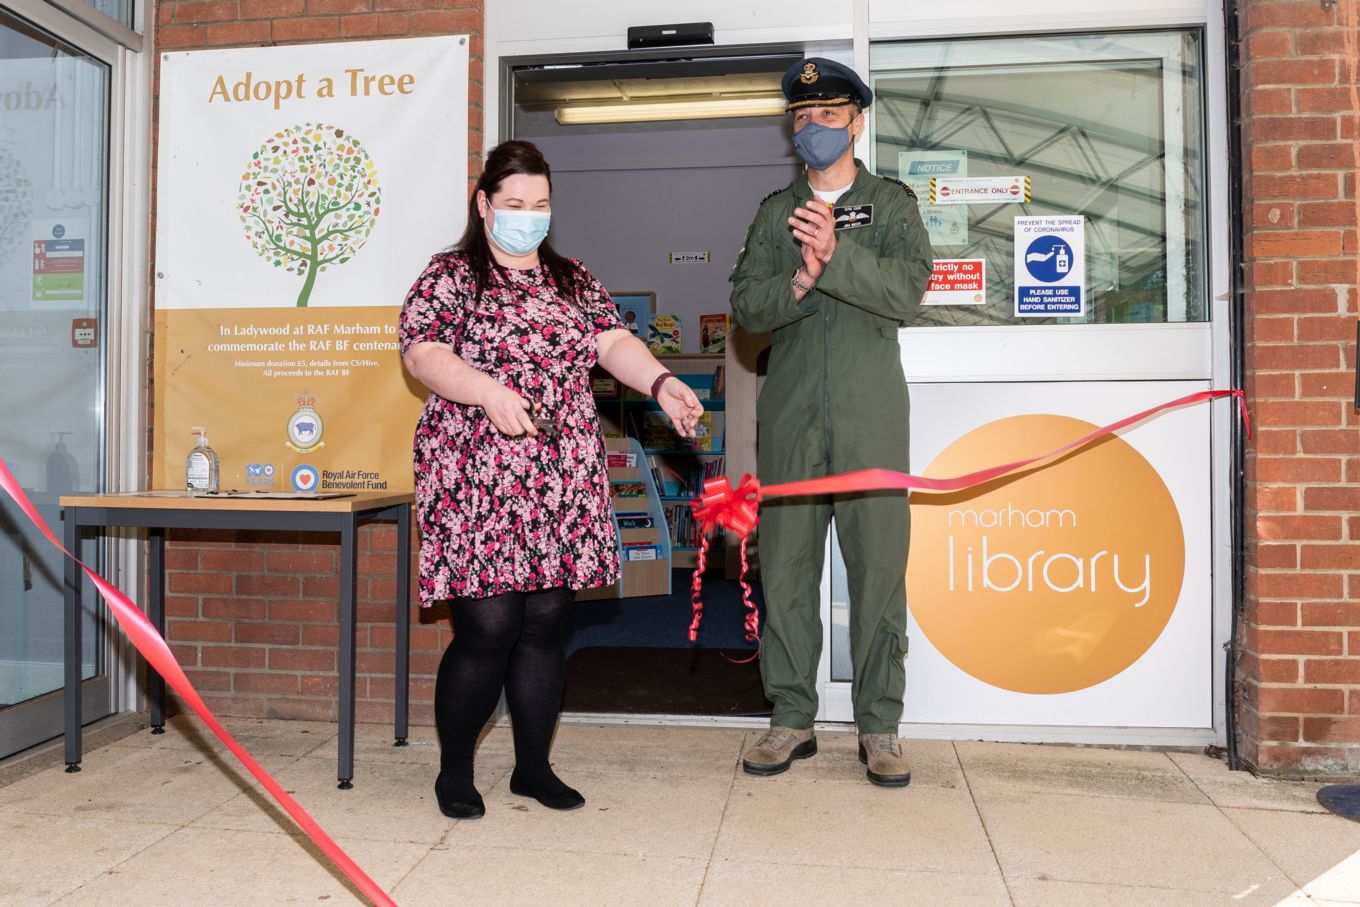 Female staff member cuts the ribbon, officially opening the library, Station Commander stood alongside clapping